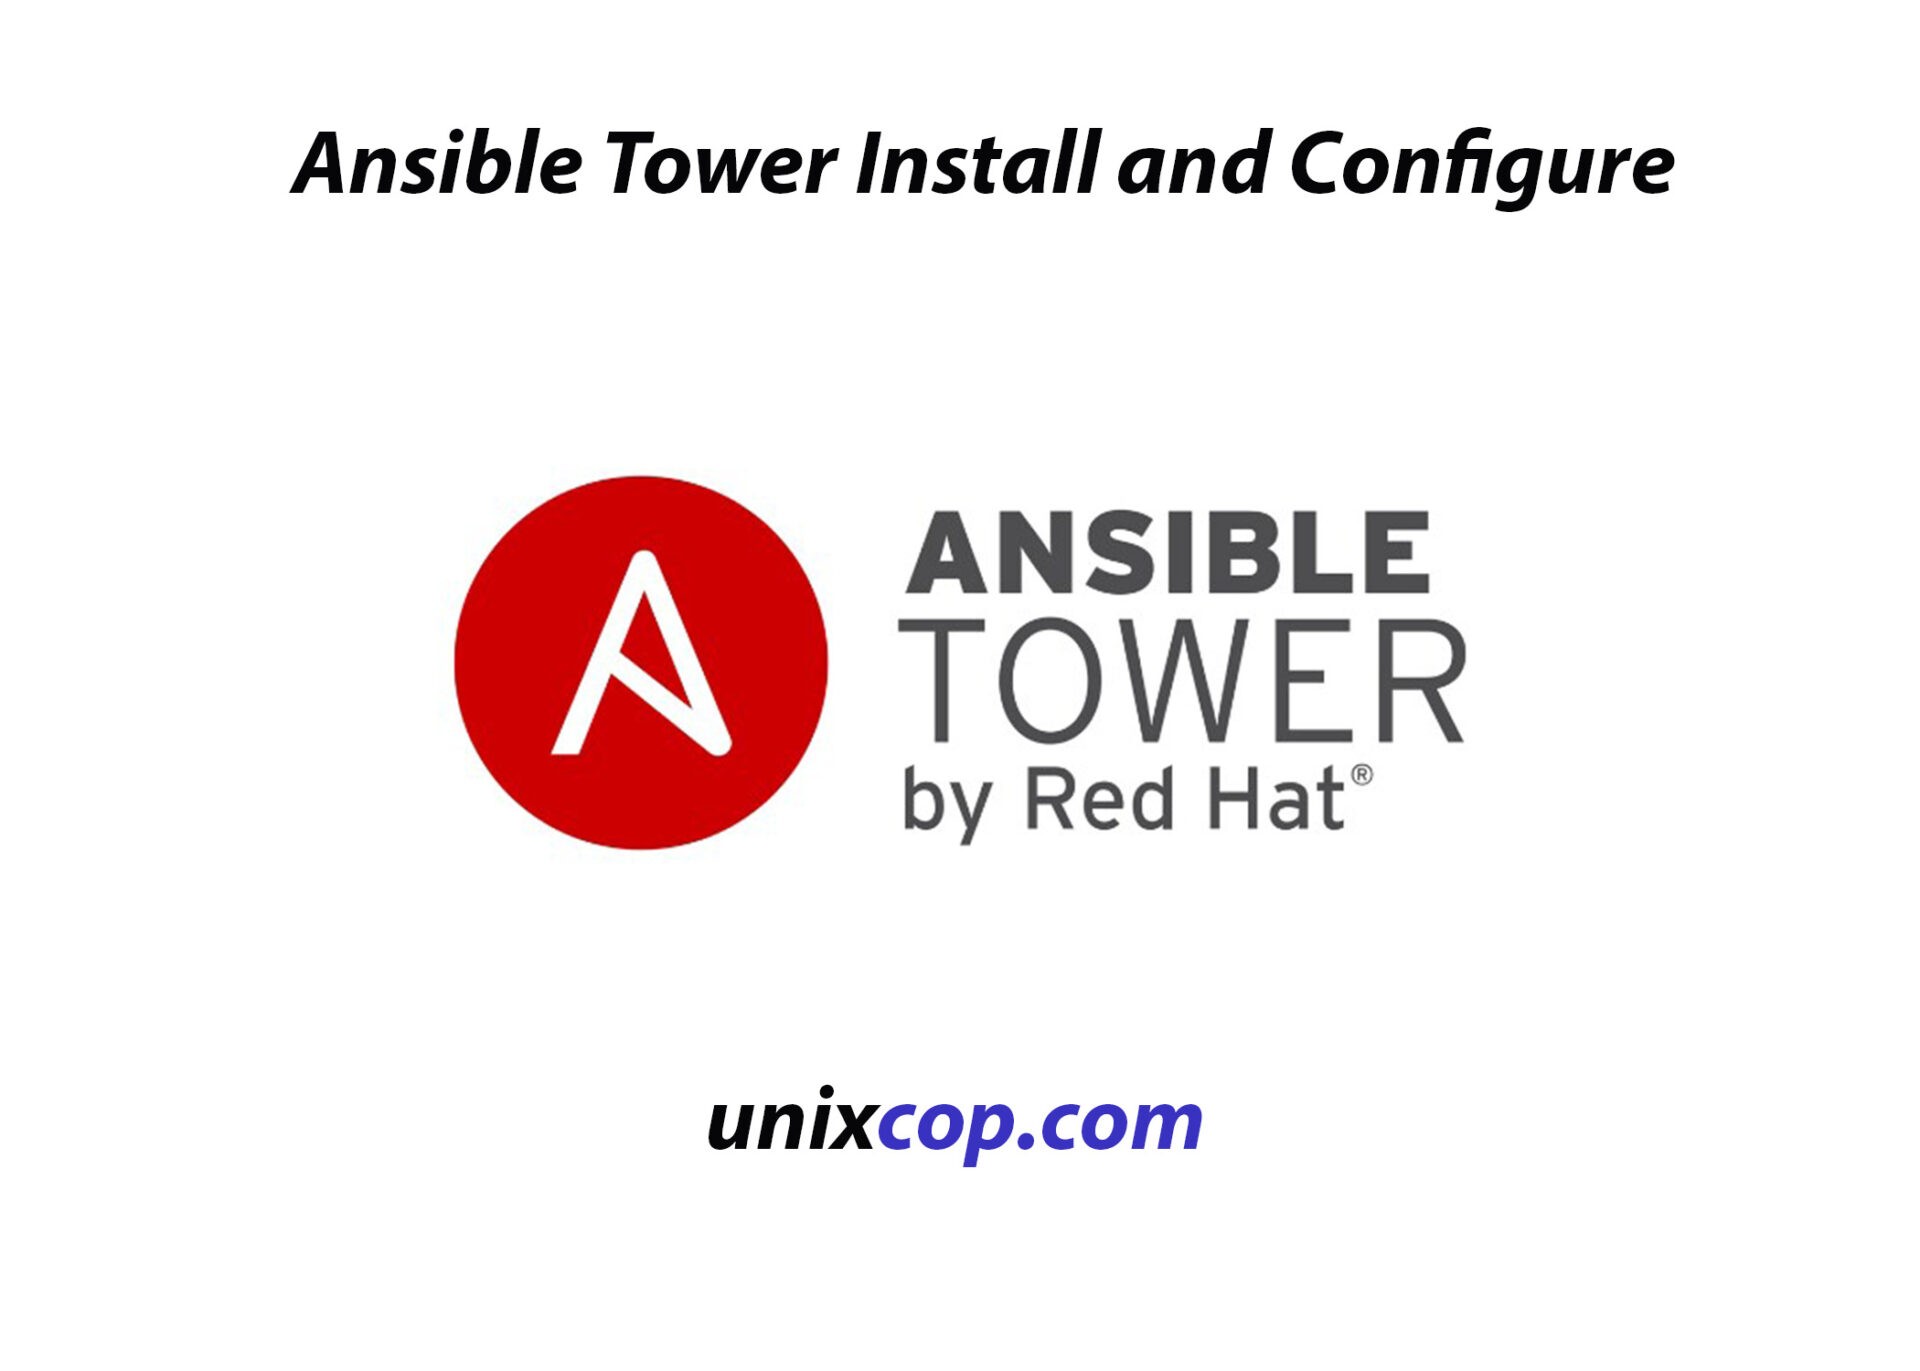 Ansible Tower Install and Configure